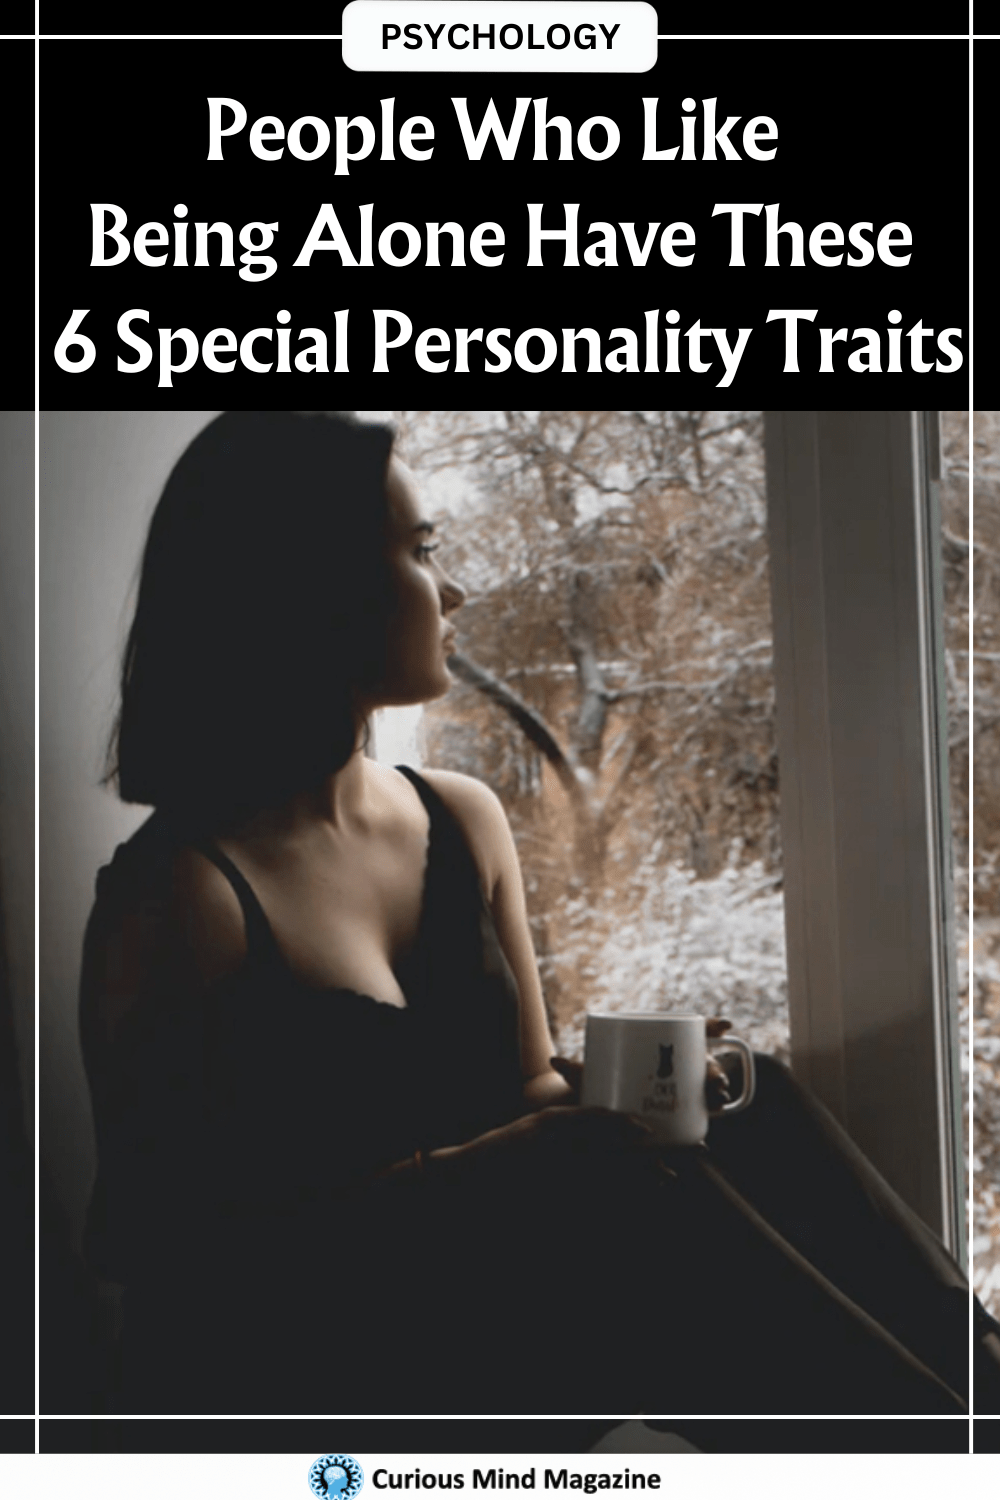 People Who Like Being Alone Have These 6 Special Personality Traits